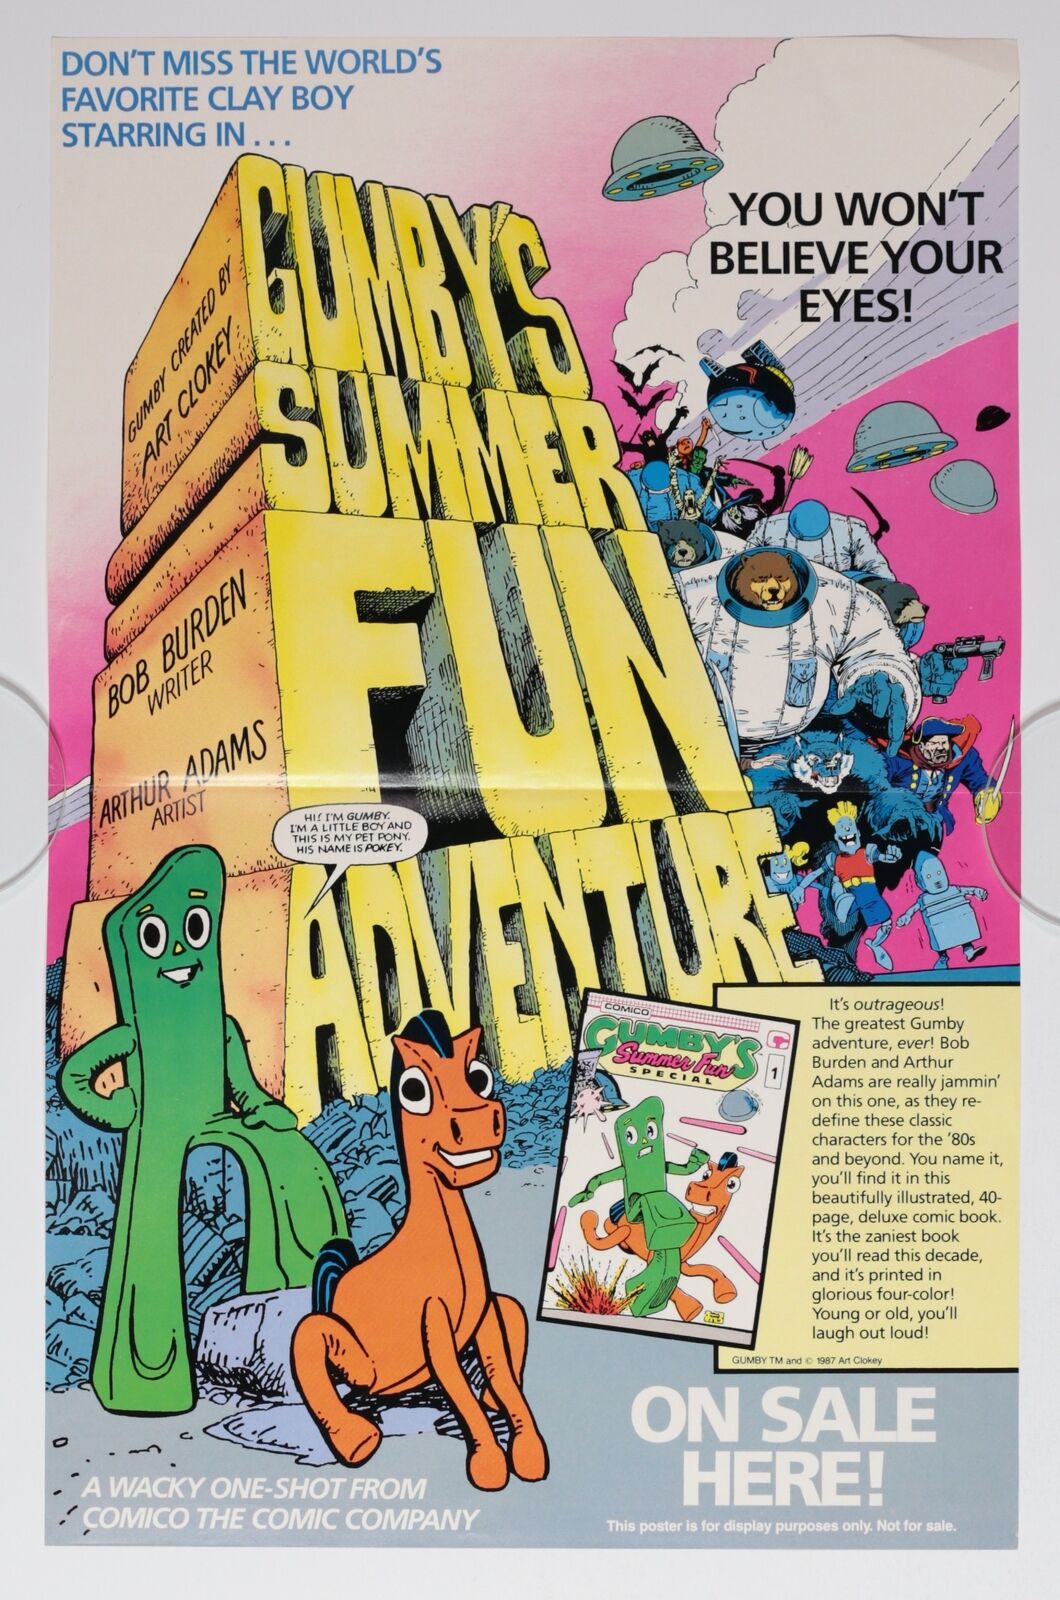 Gumby's Summer Fun Adventure Promotional Poster by Art Adams